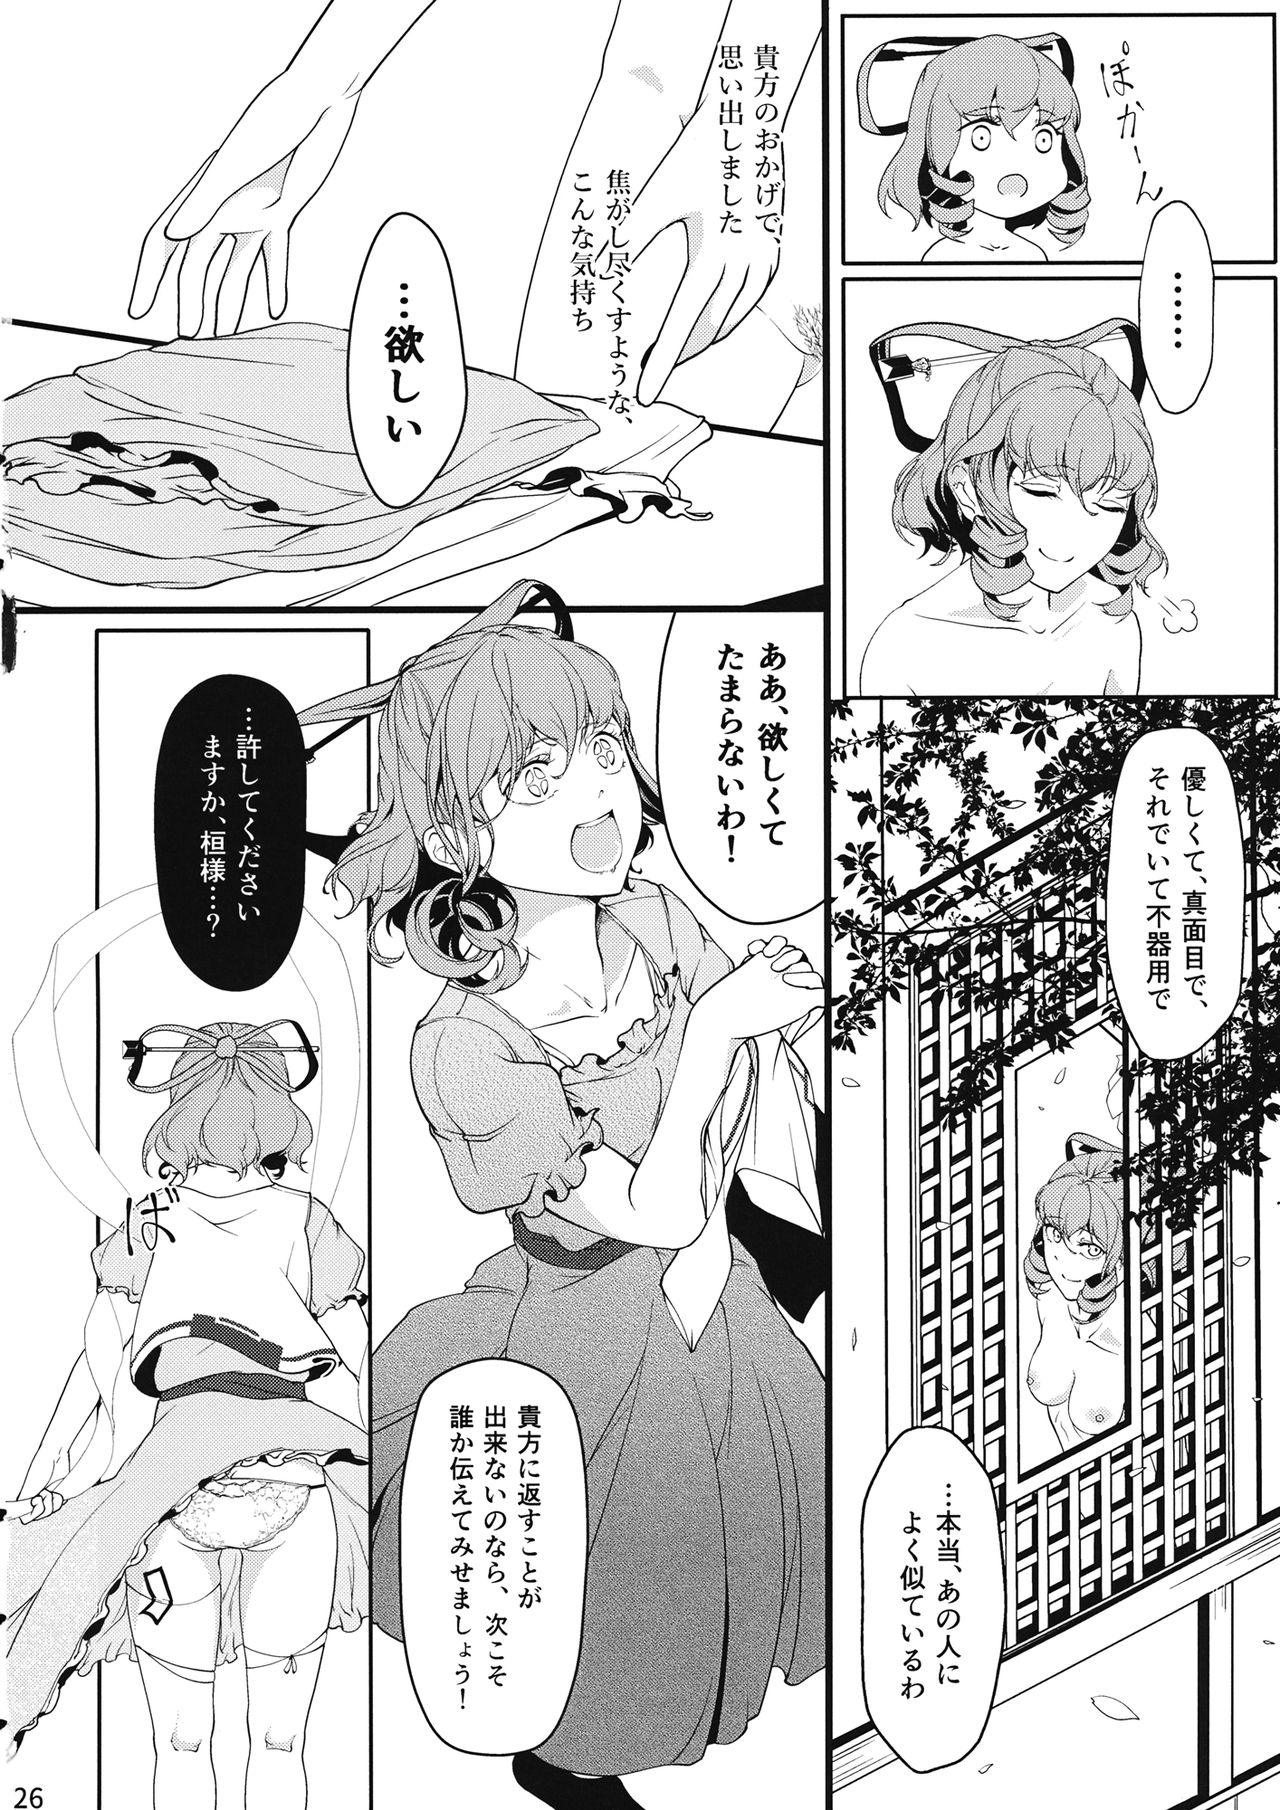 (C97) [Flying Bear (Hiyou)] Reverse Damage (Touhou Project) page 25 full